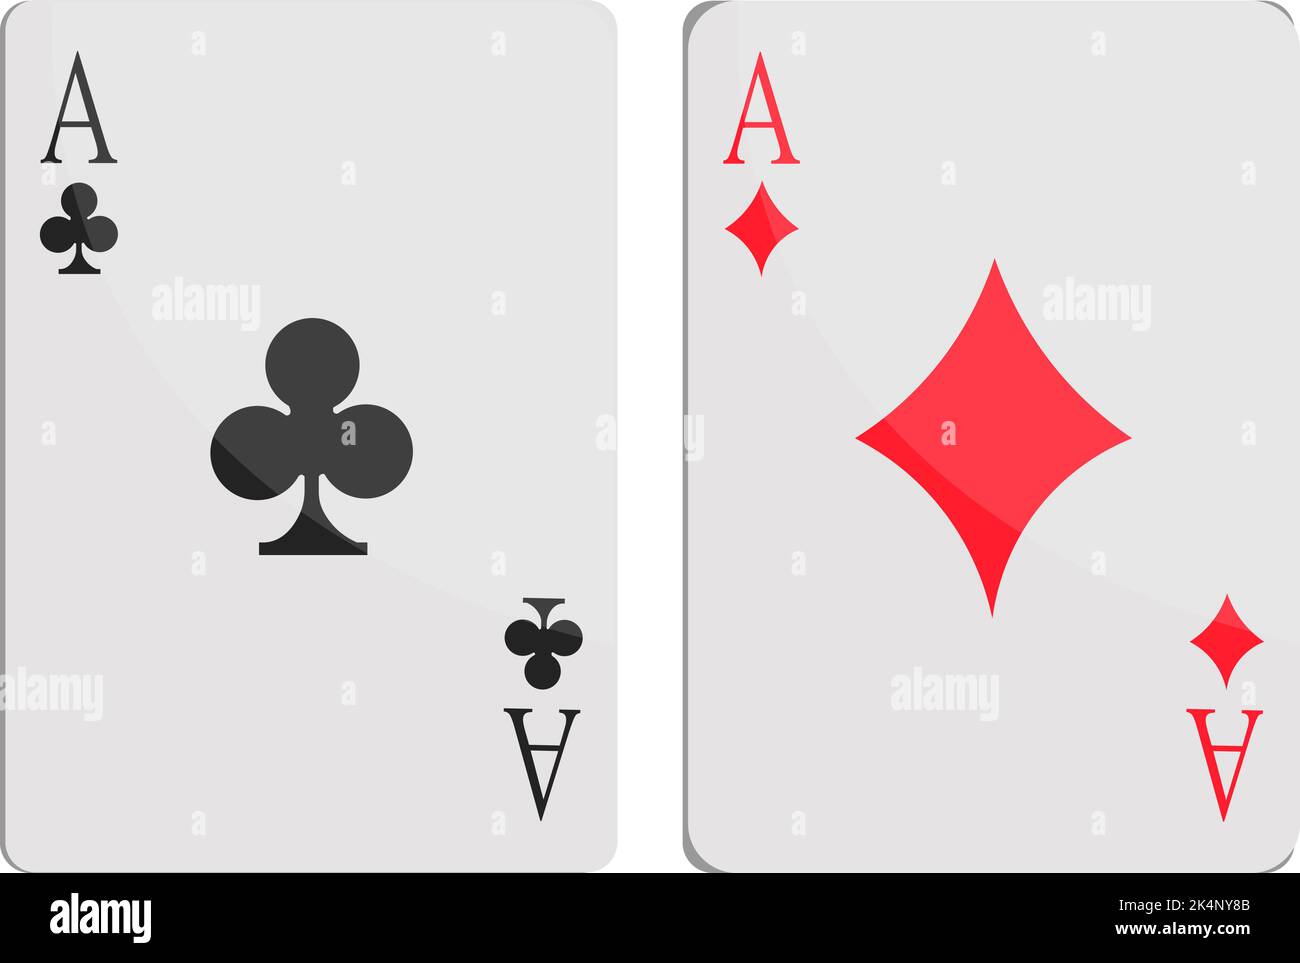 Two Poker Cards Stock Photo, Royalty-Free